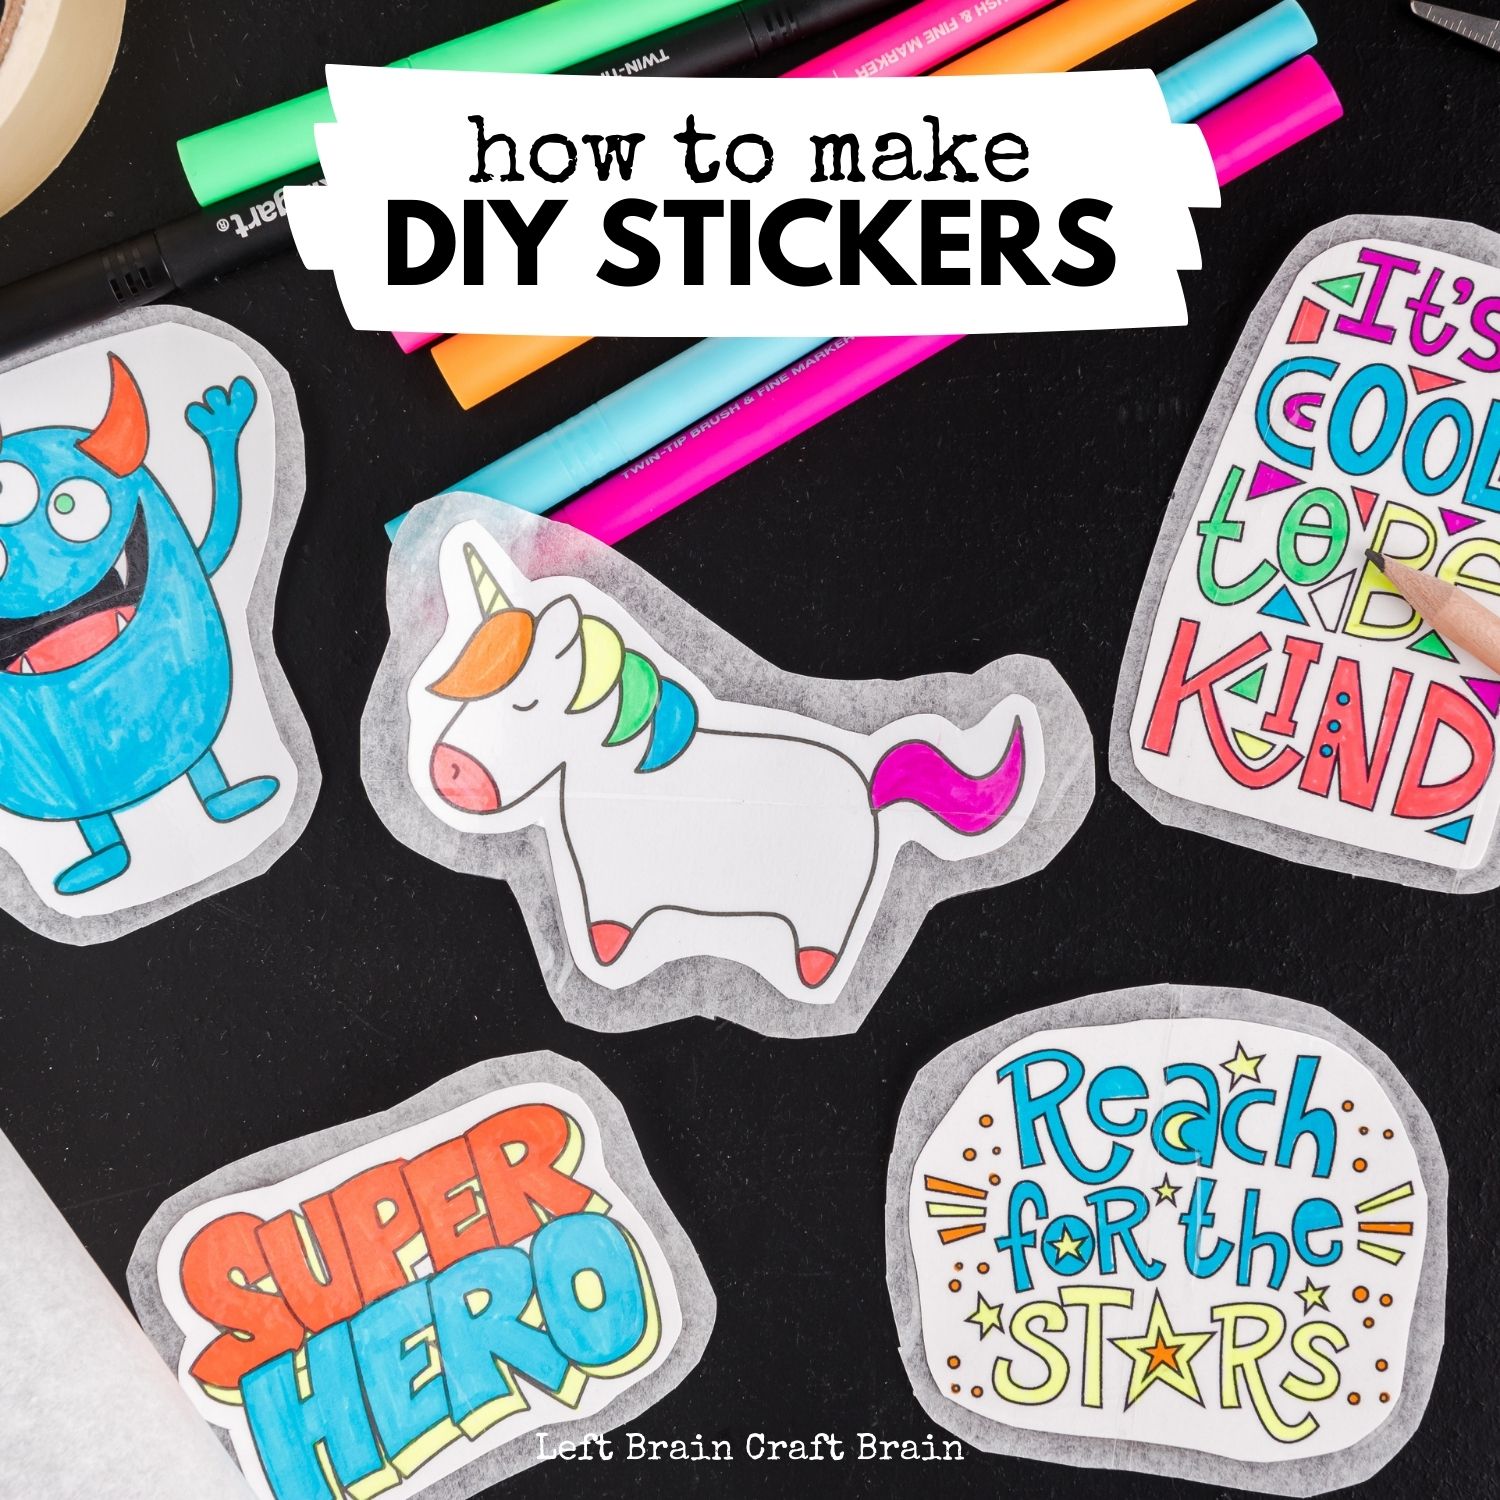 Make your own DIY stickers with a super easy process using basic supplies. Kids will love this activity. They're fun to add to presents, too.